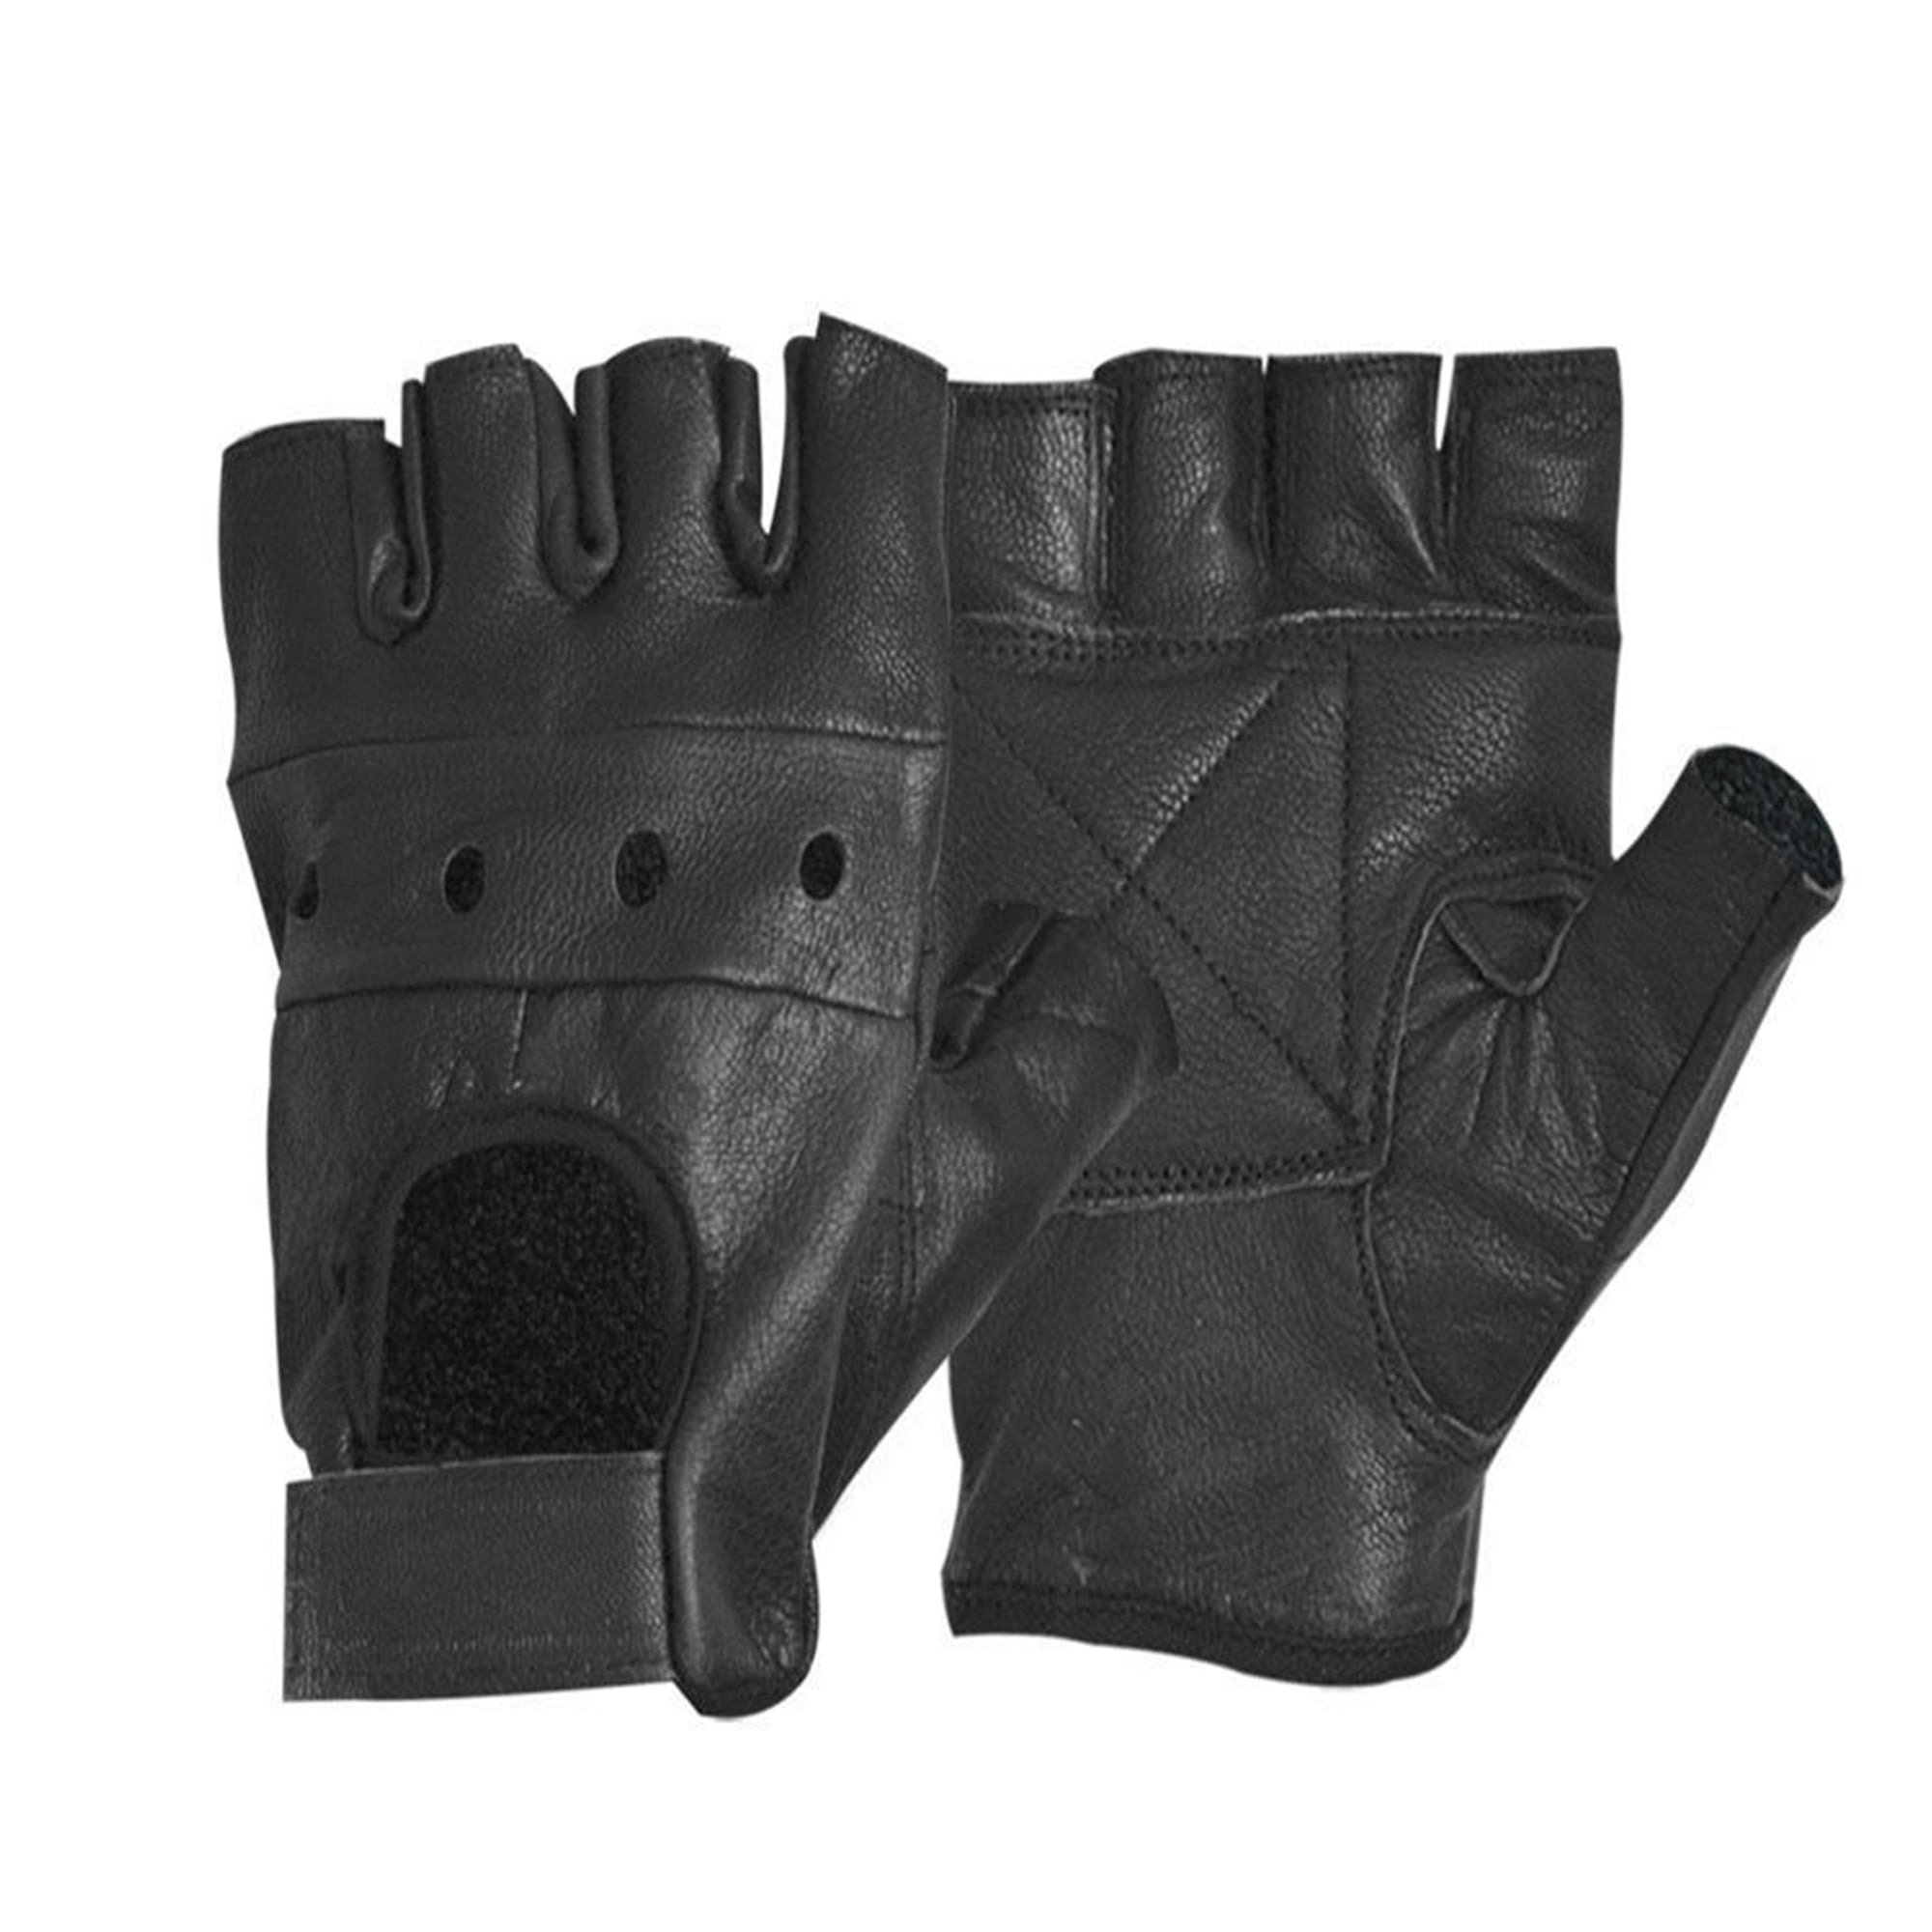 CYCLING GLOVES GENUINE LEATHER WEIGHT LIGTING HALF FINGER UNISEX FITNESS GLOVE 